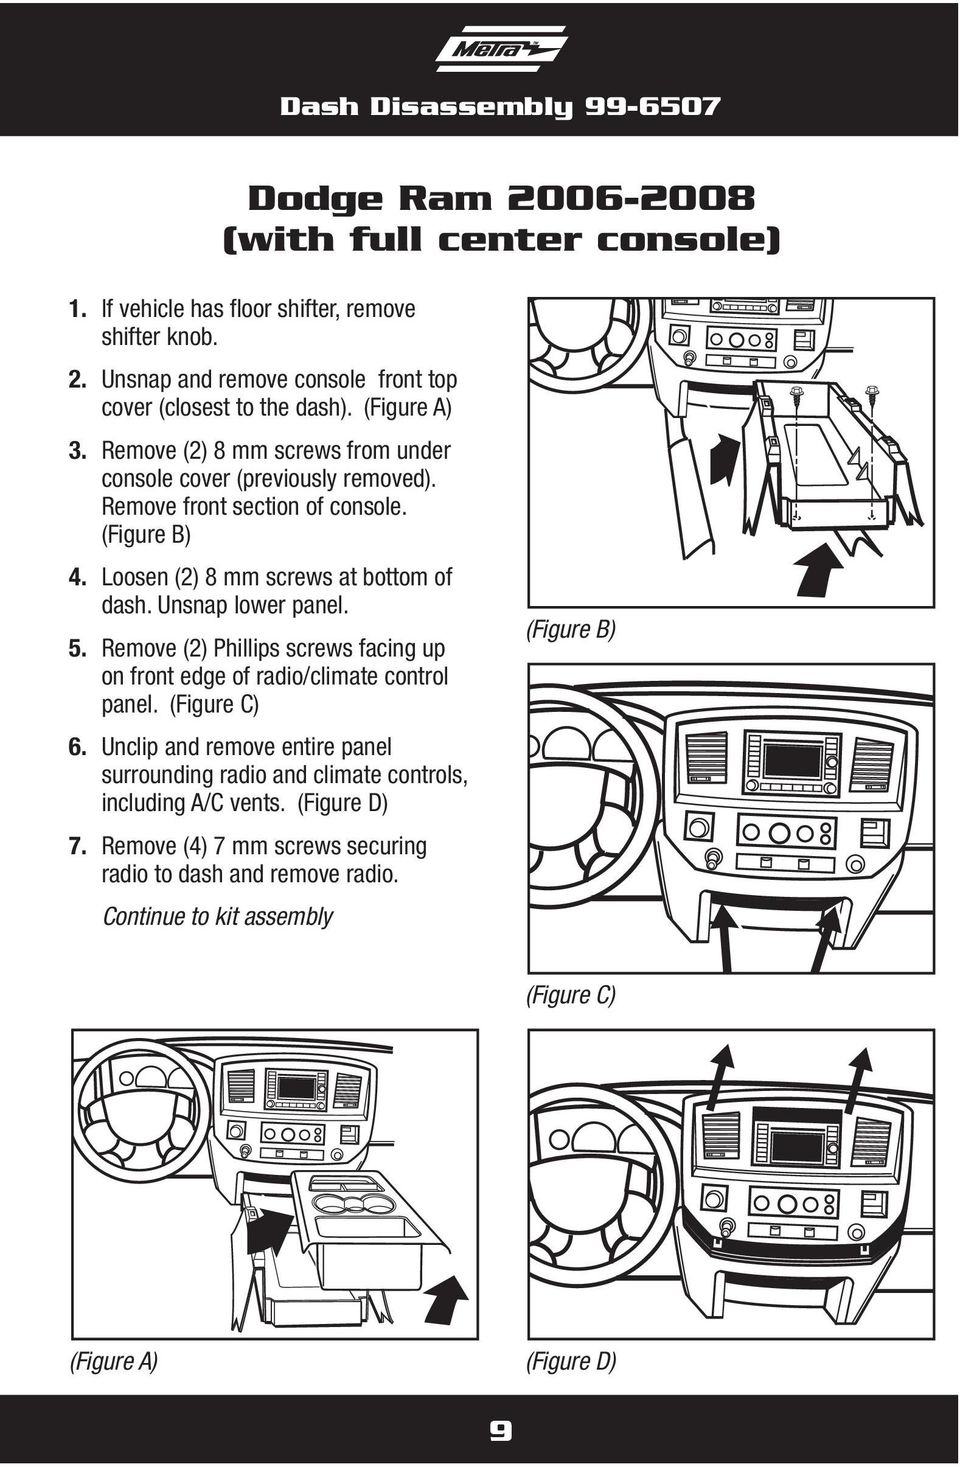 Unsnap lower panel. 5. Remove (2) Phillips screws facing up on front edge of radio/climate control panel. (Figure C) 6.